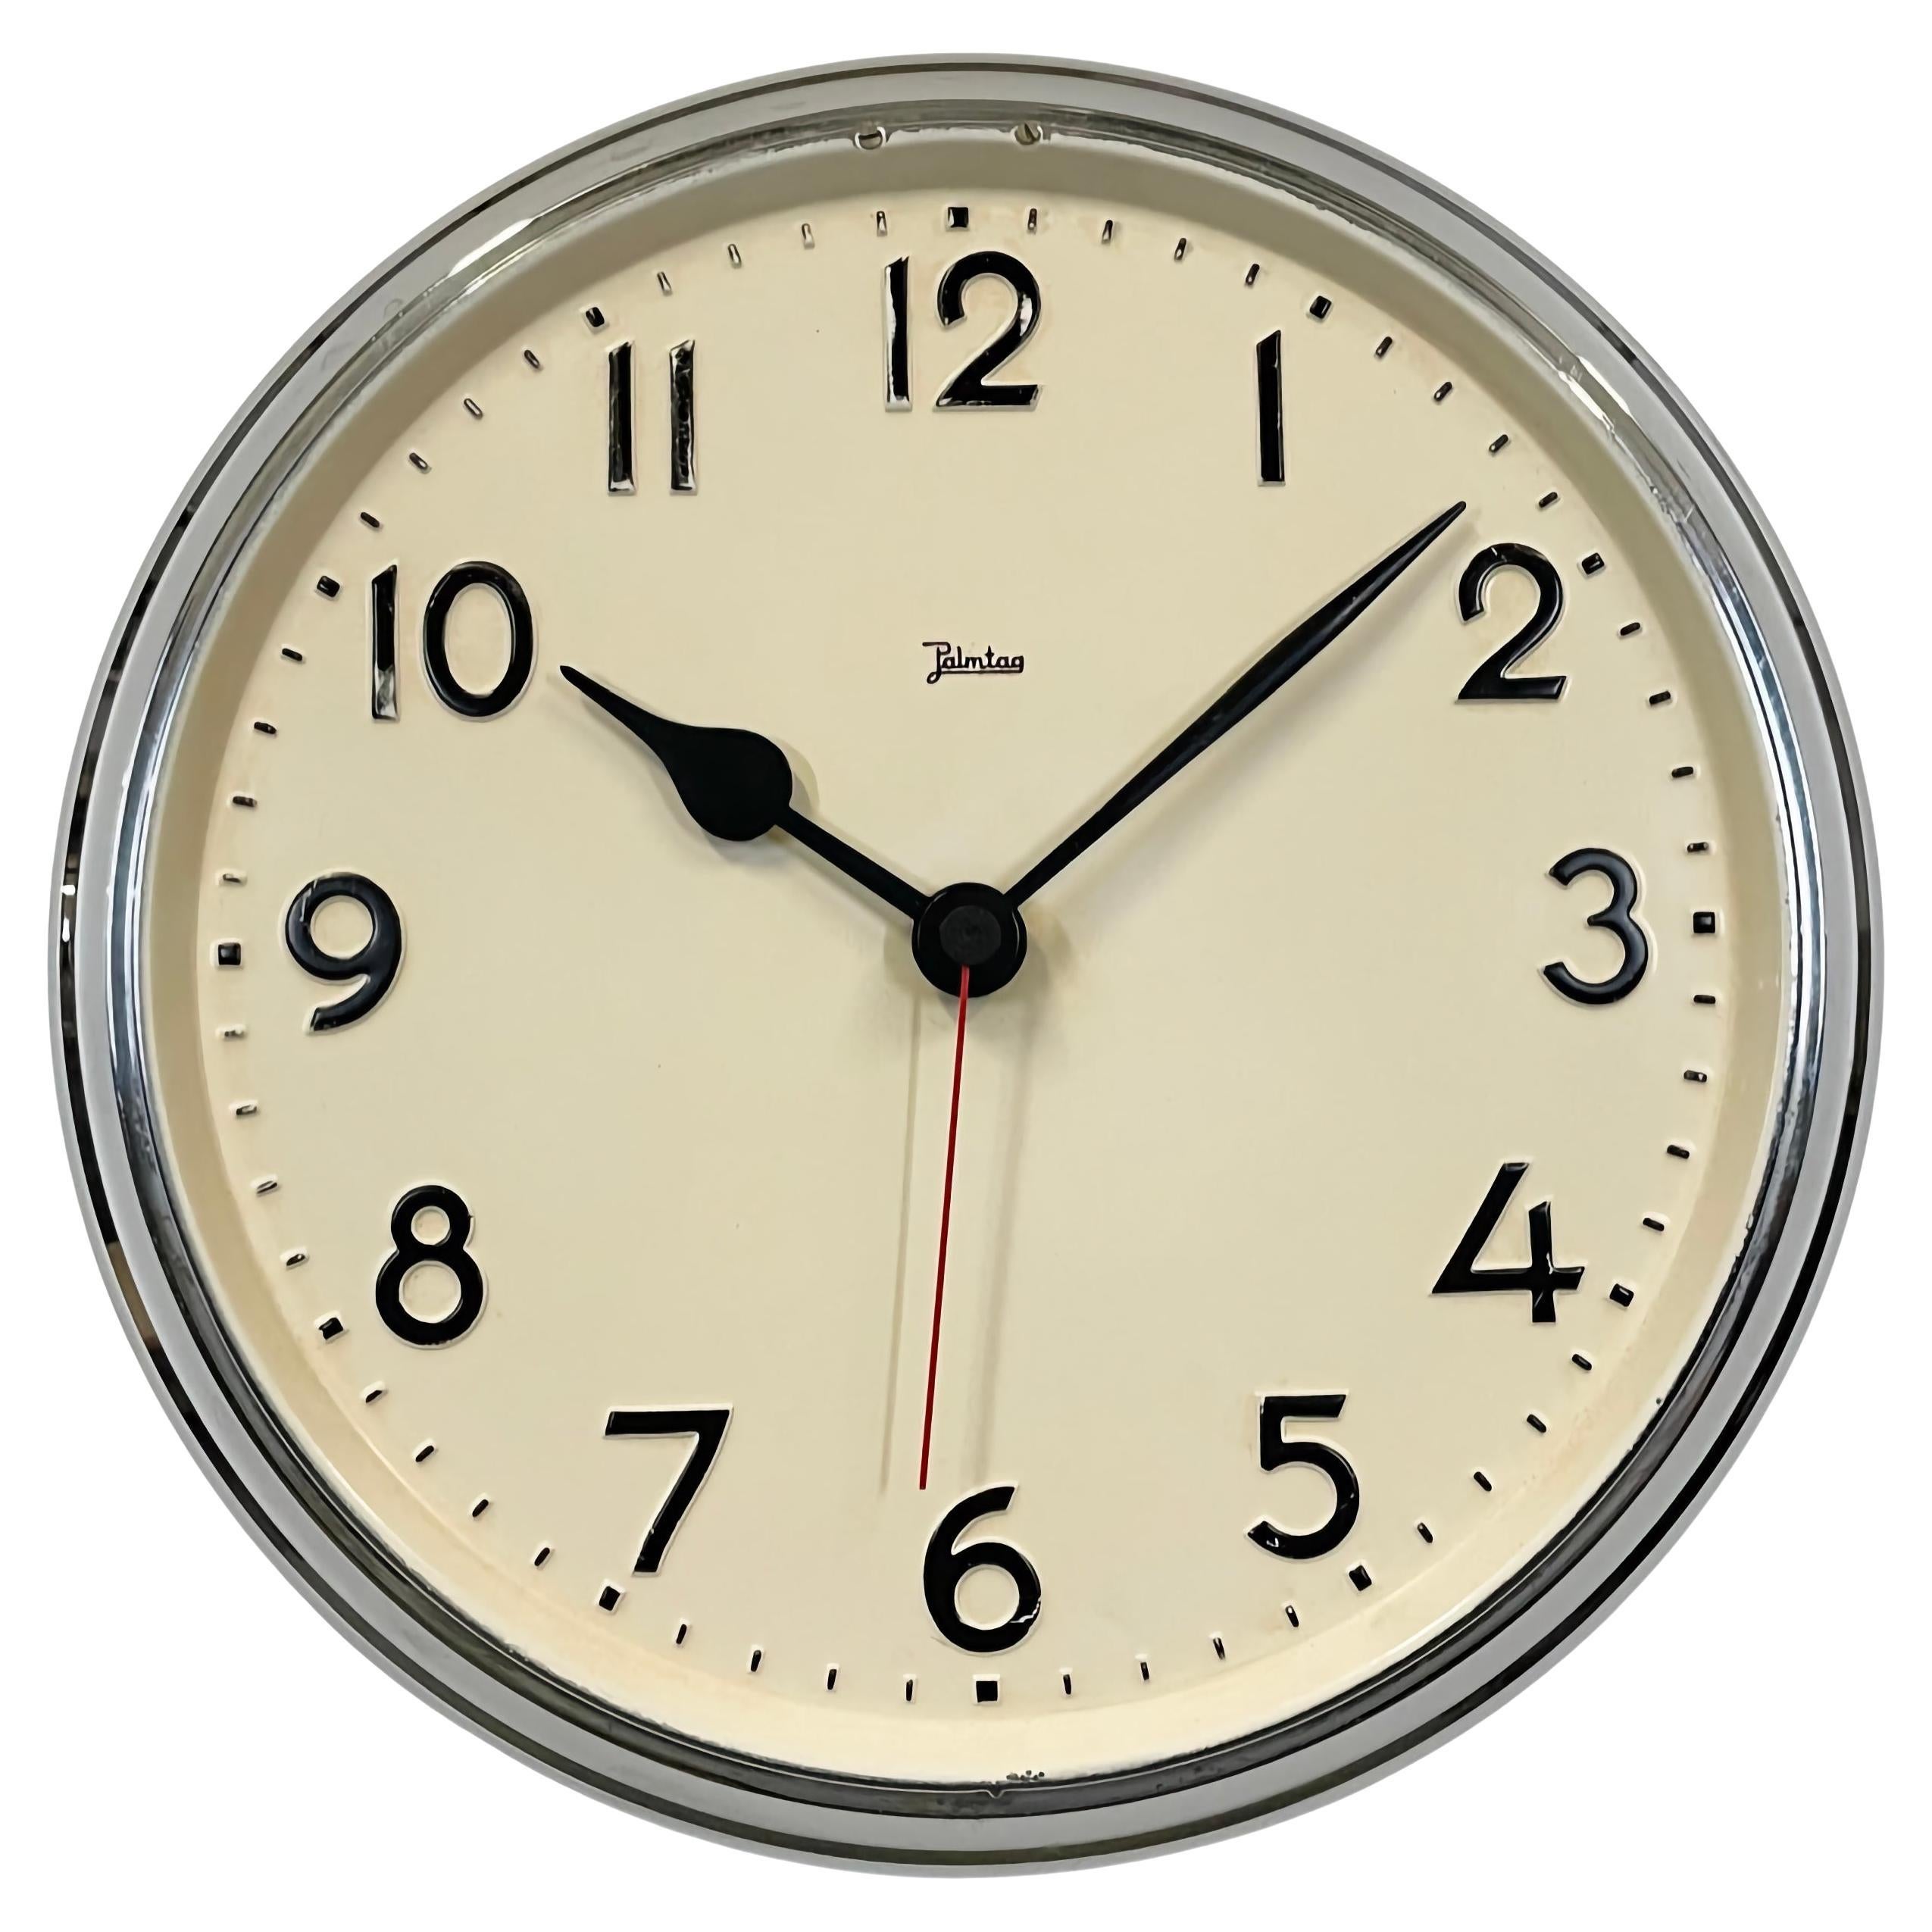 Vintage German Wall Clock from Palmtag, 1950s For Sale